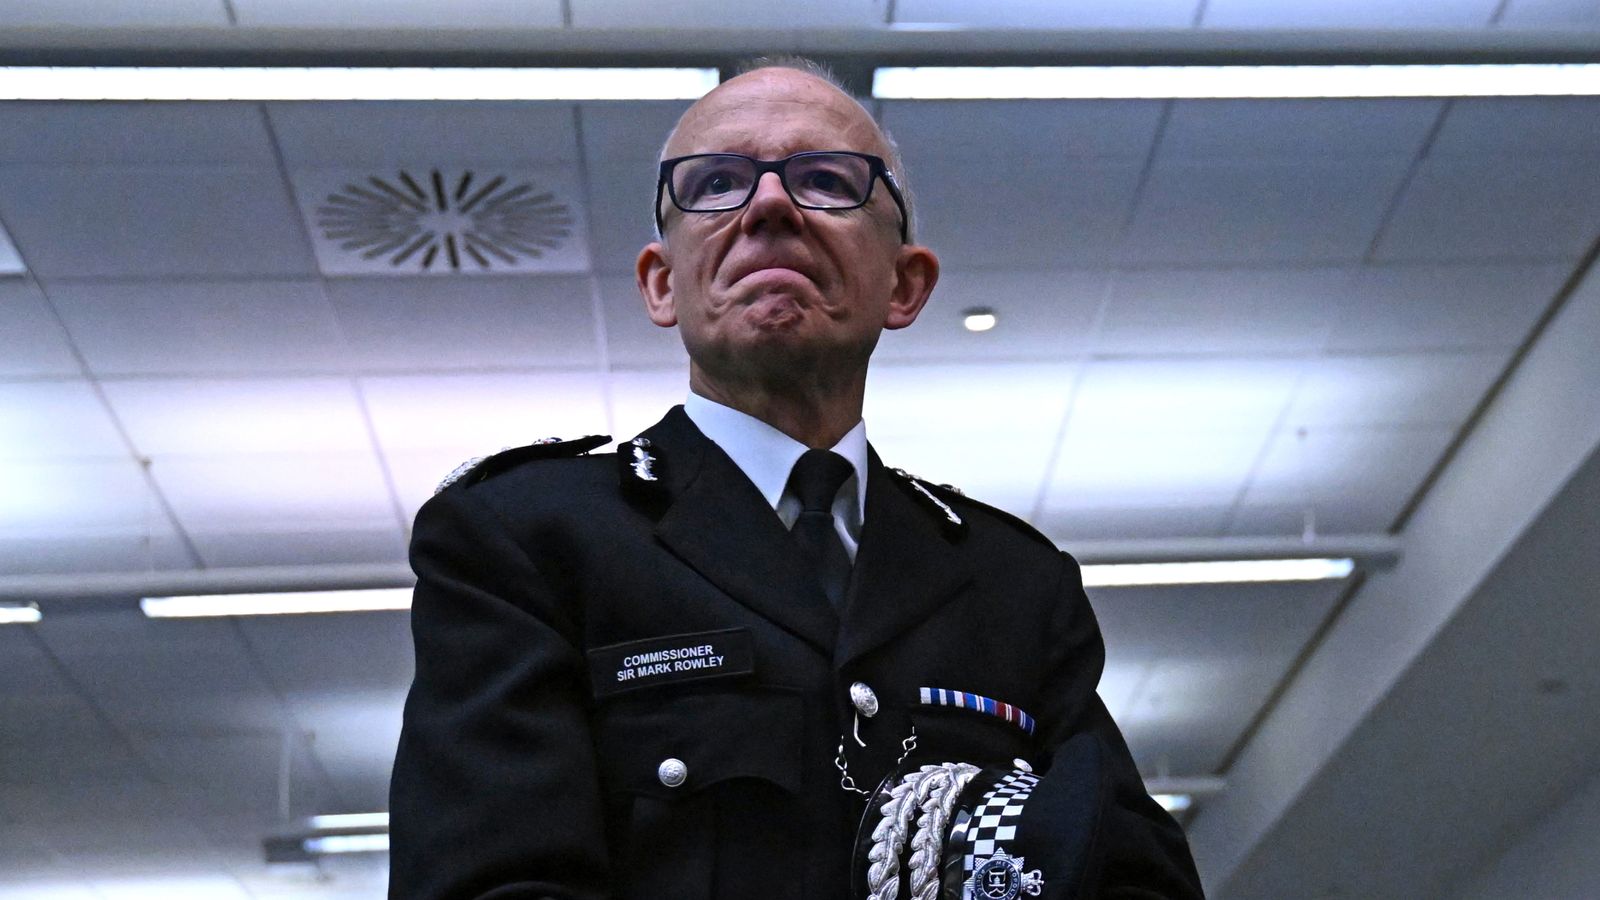 Met Police chief unveils plan to reform the service and restore trust in wake of David Carrick case